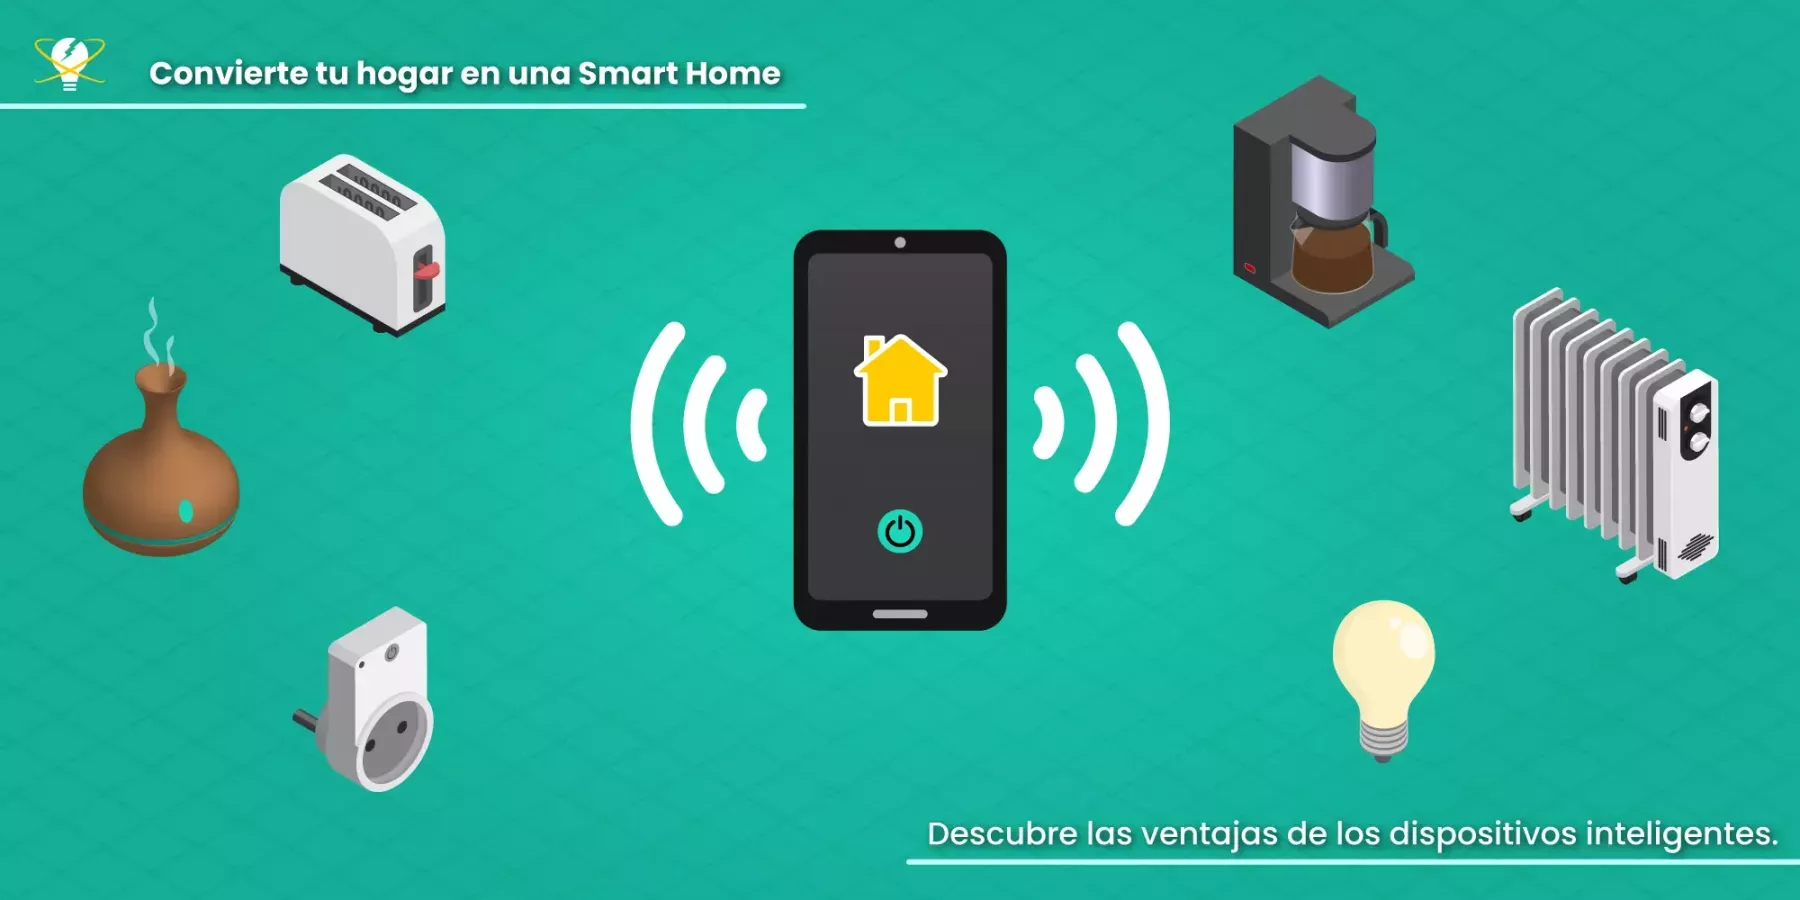 Turn your home into a Smart Home: discover smart devices